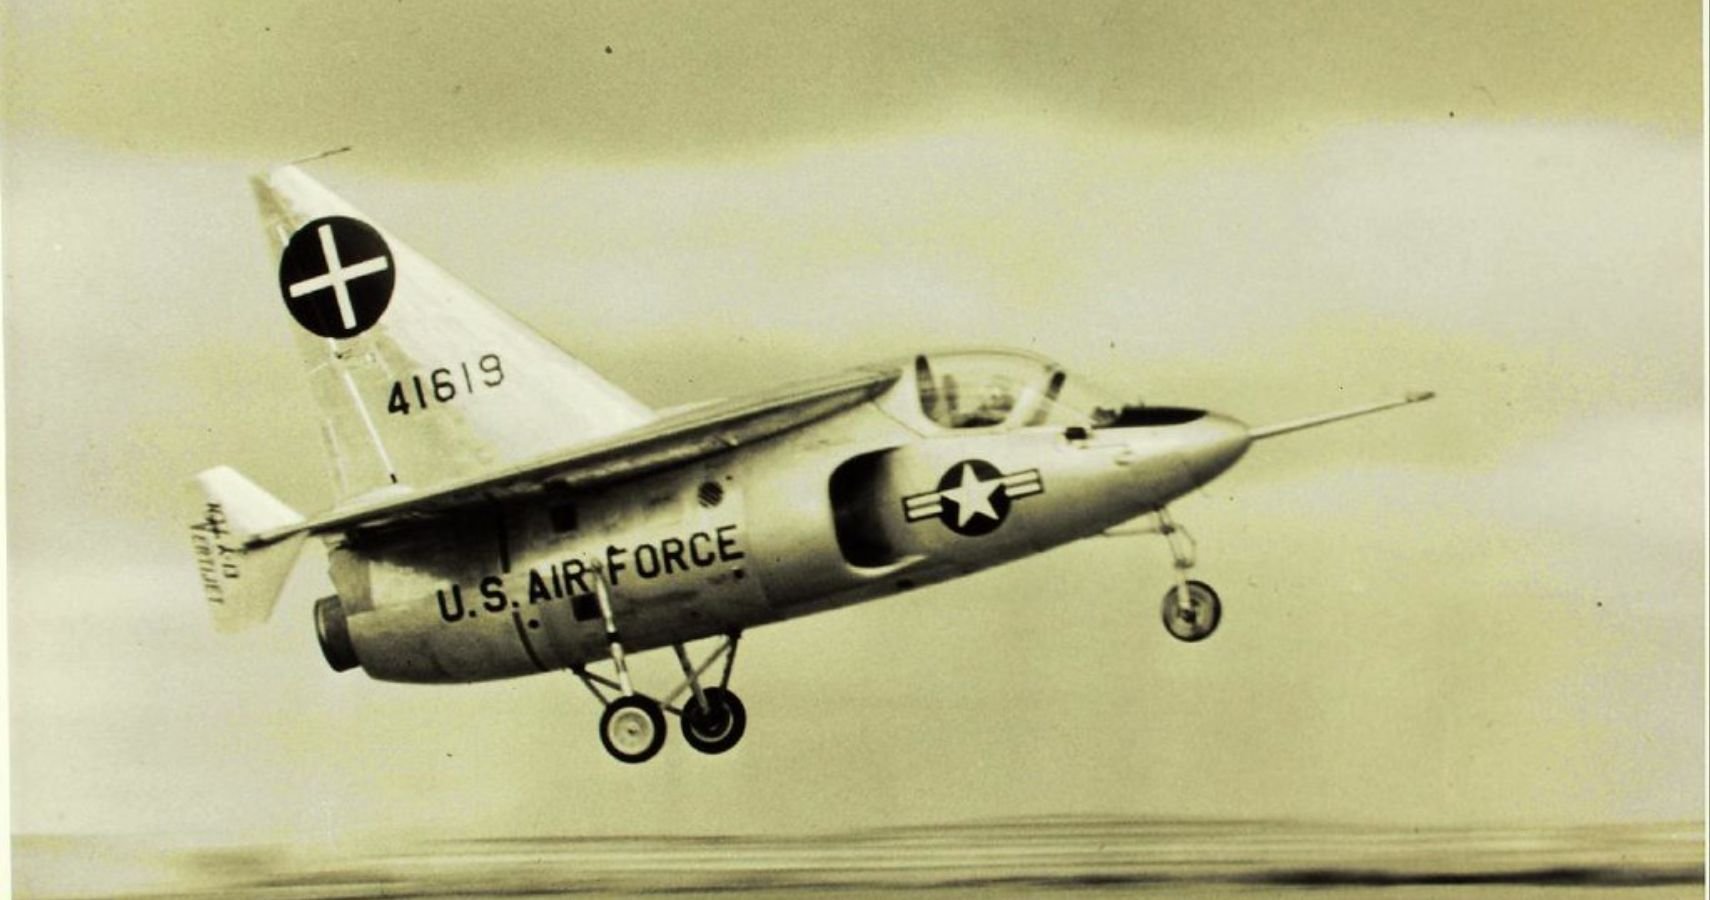 Why The U.S. Air Force’s Small Ryan X-13 Vertijet Was A Massive Failure